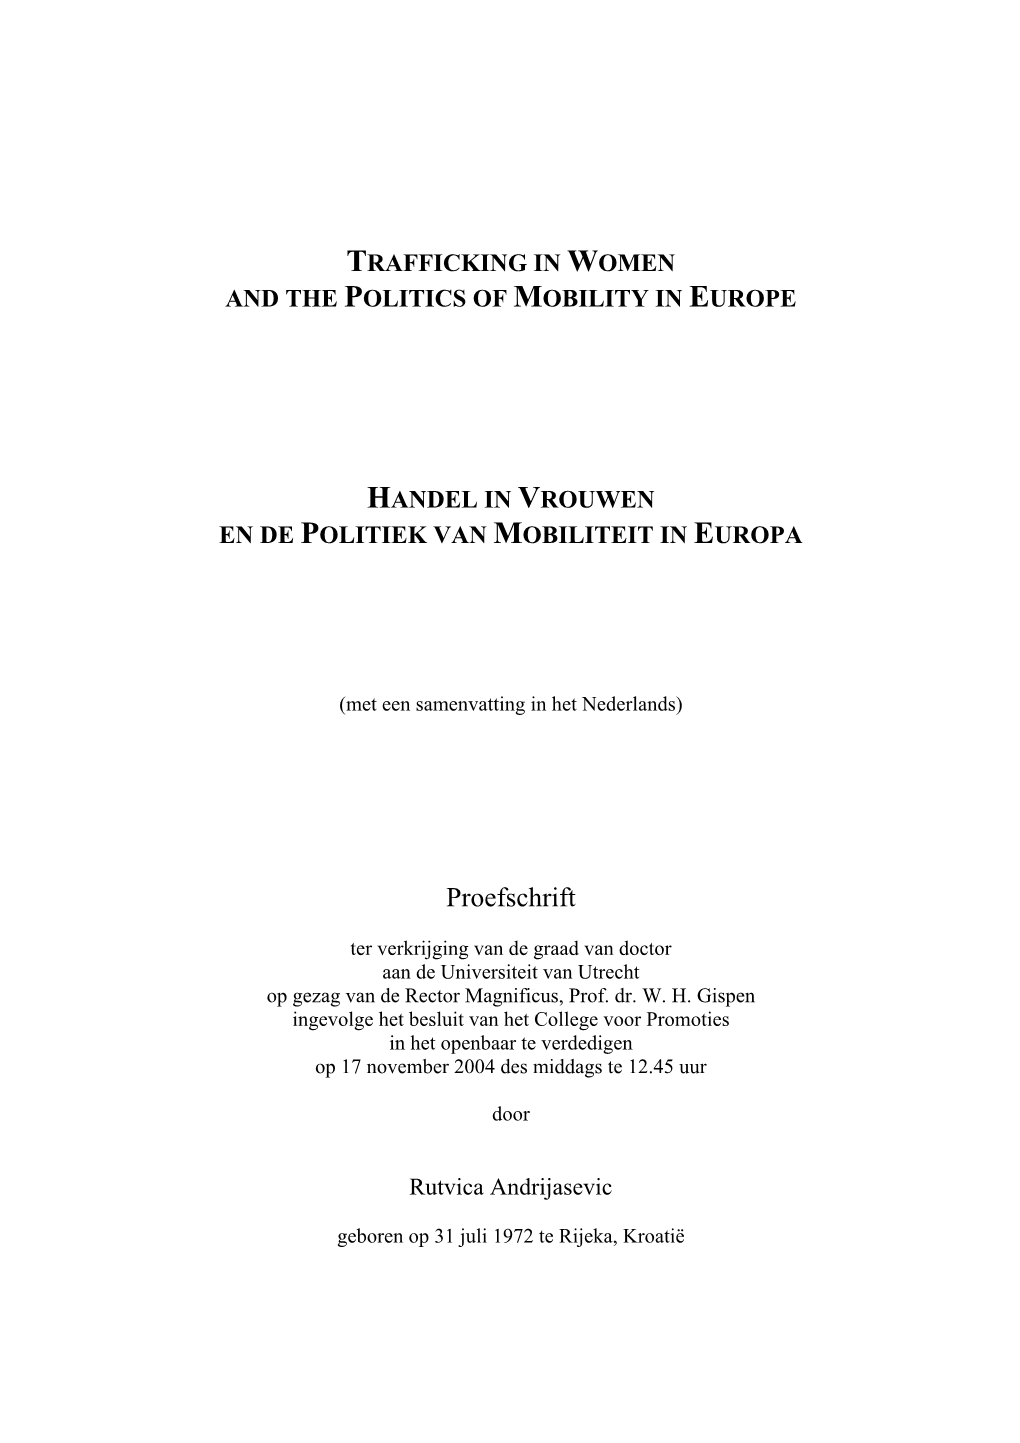 Trafficking in Women and the Politics of Mobility in Europe